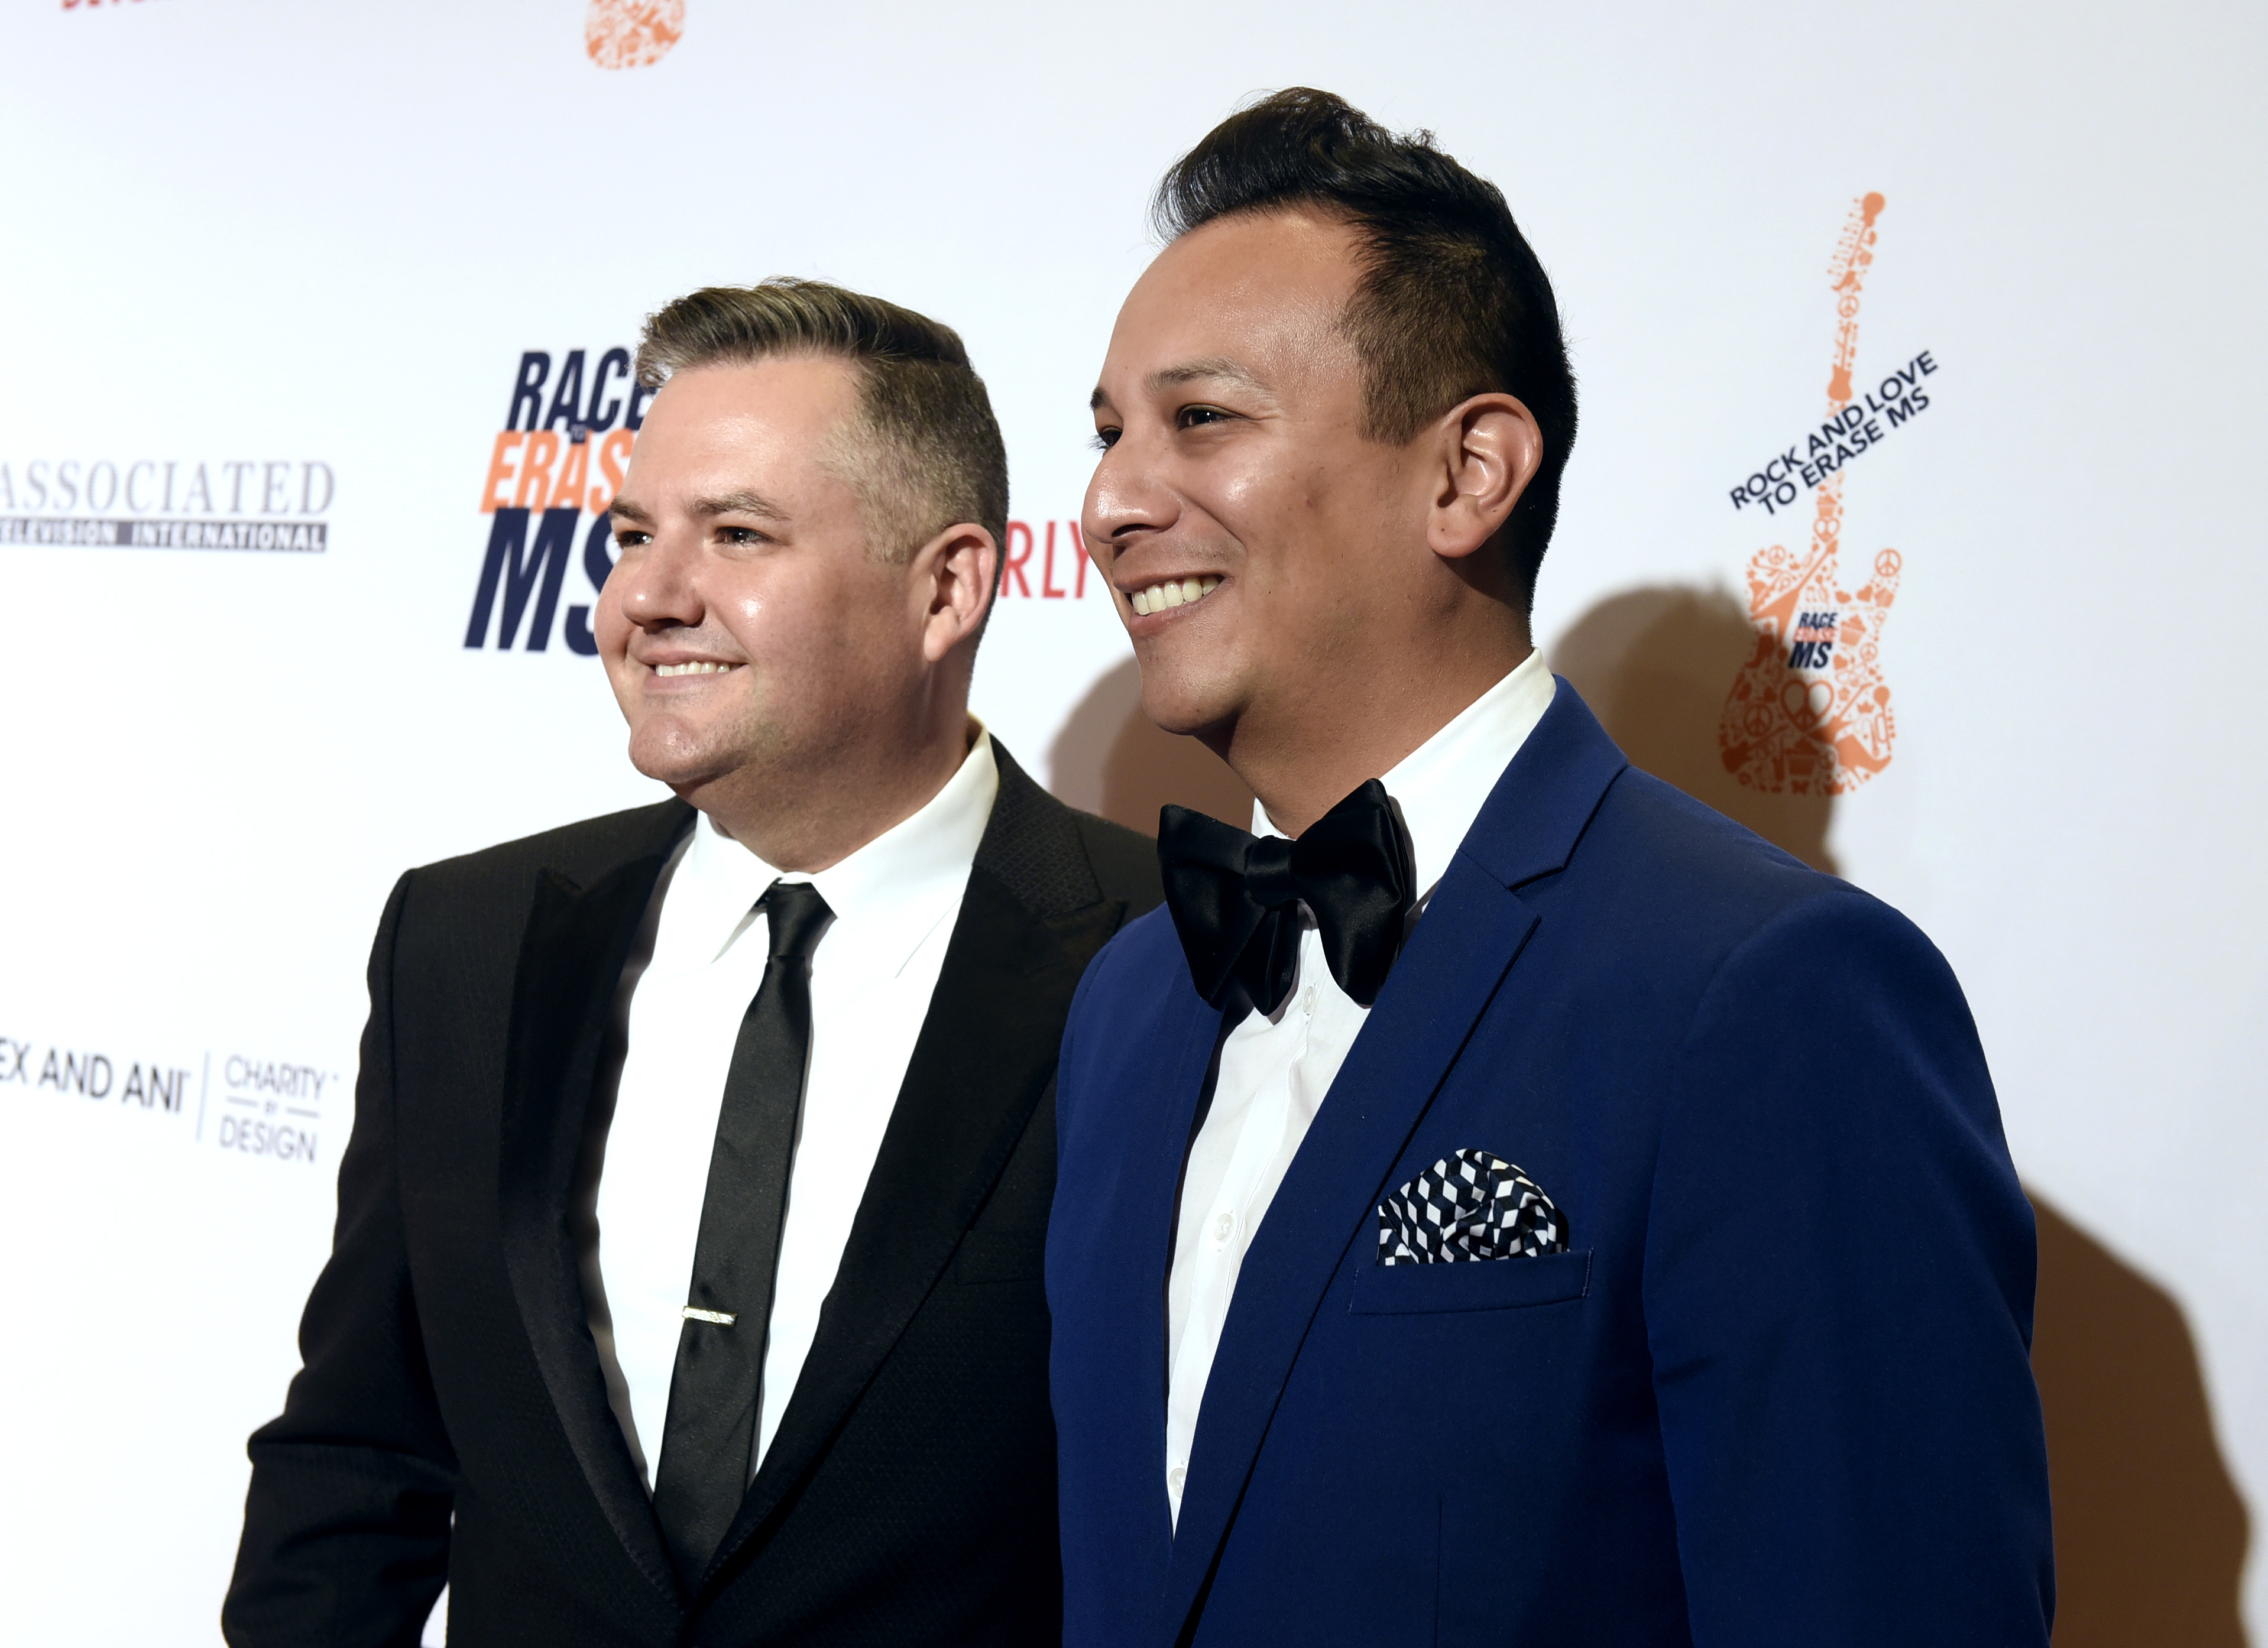 Ross Mathews and Salvador Camarena attend the 23rd Annual Race To Erase MS Gala